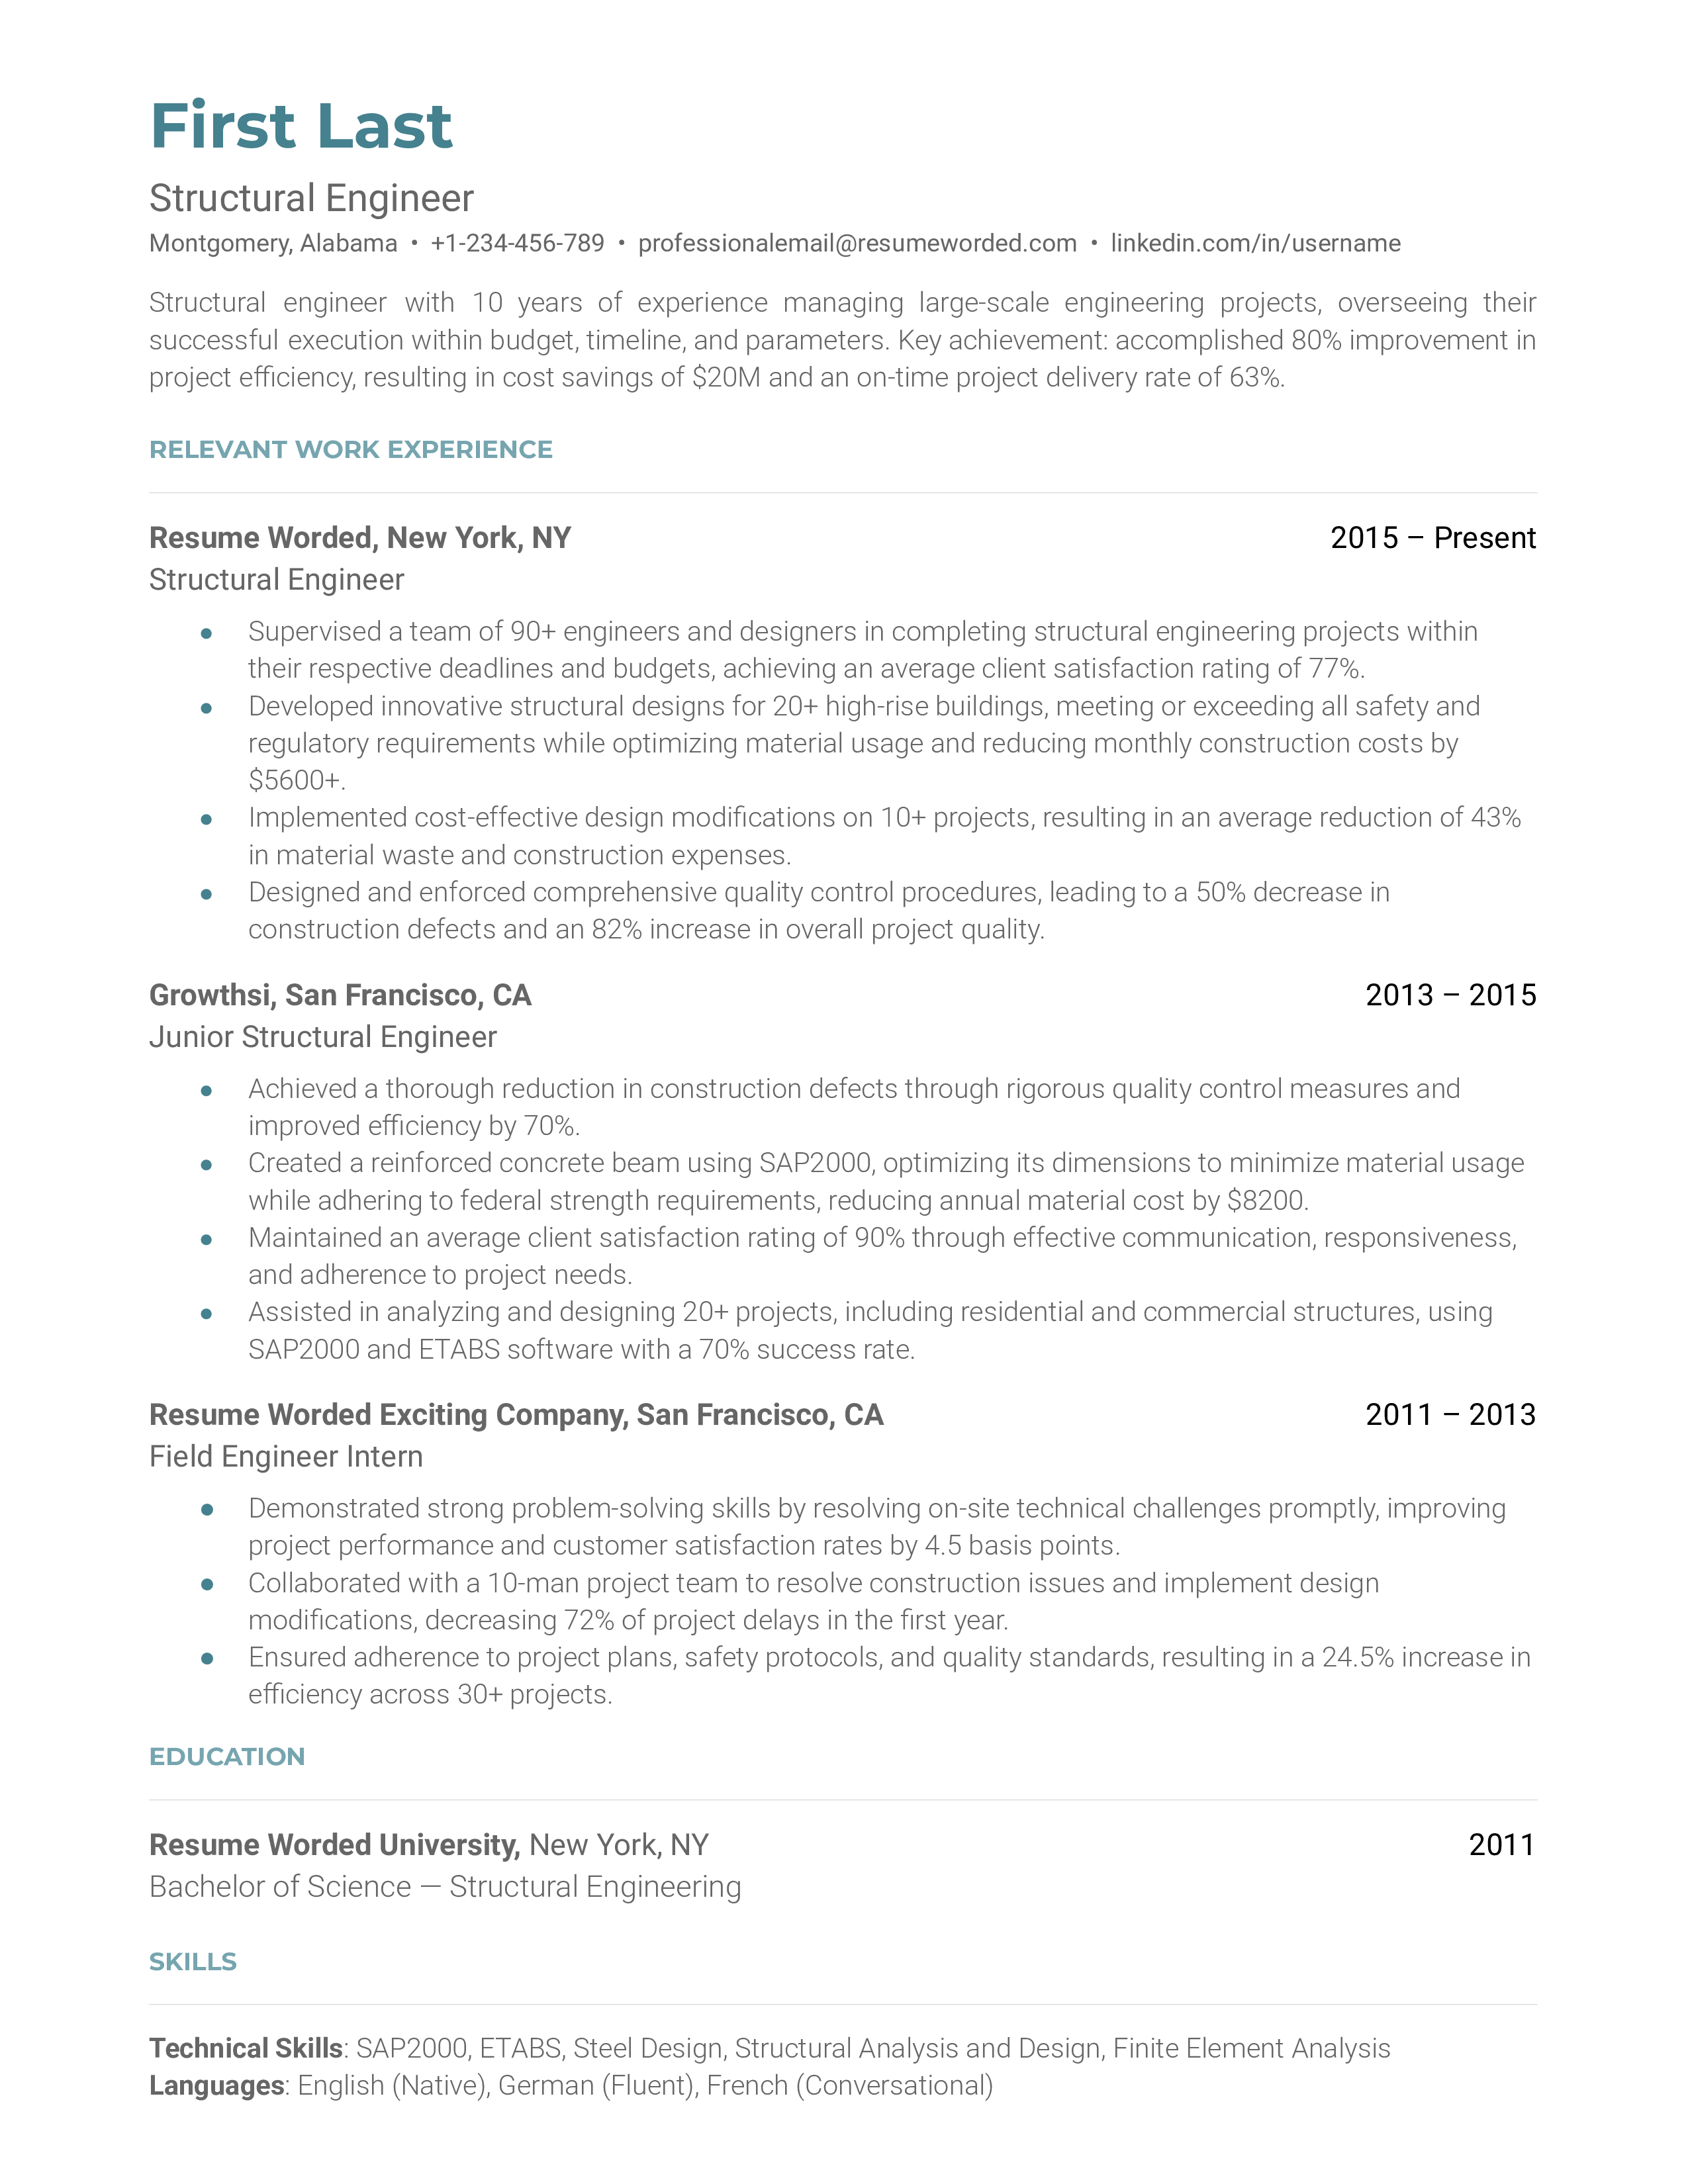 Structural Engineer resume highlighting certifications and complex projects.